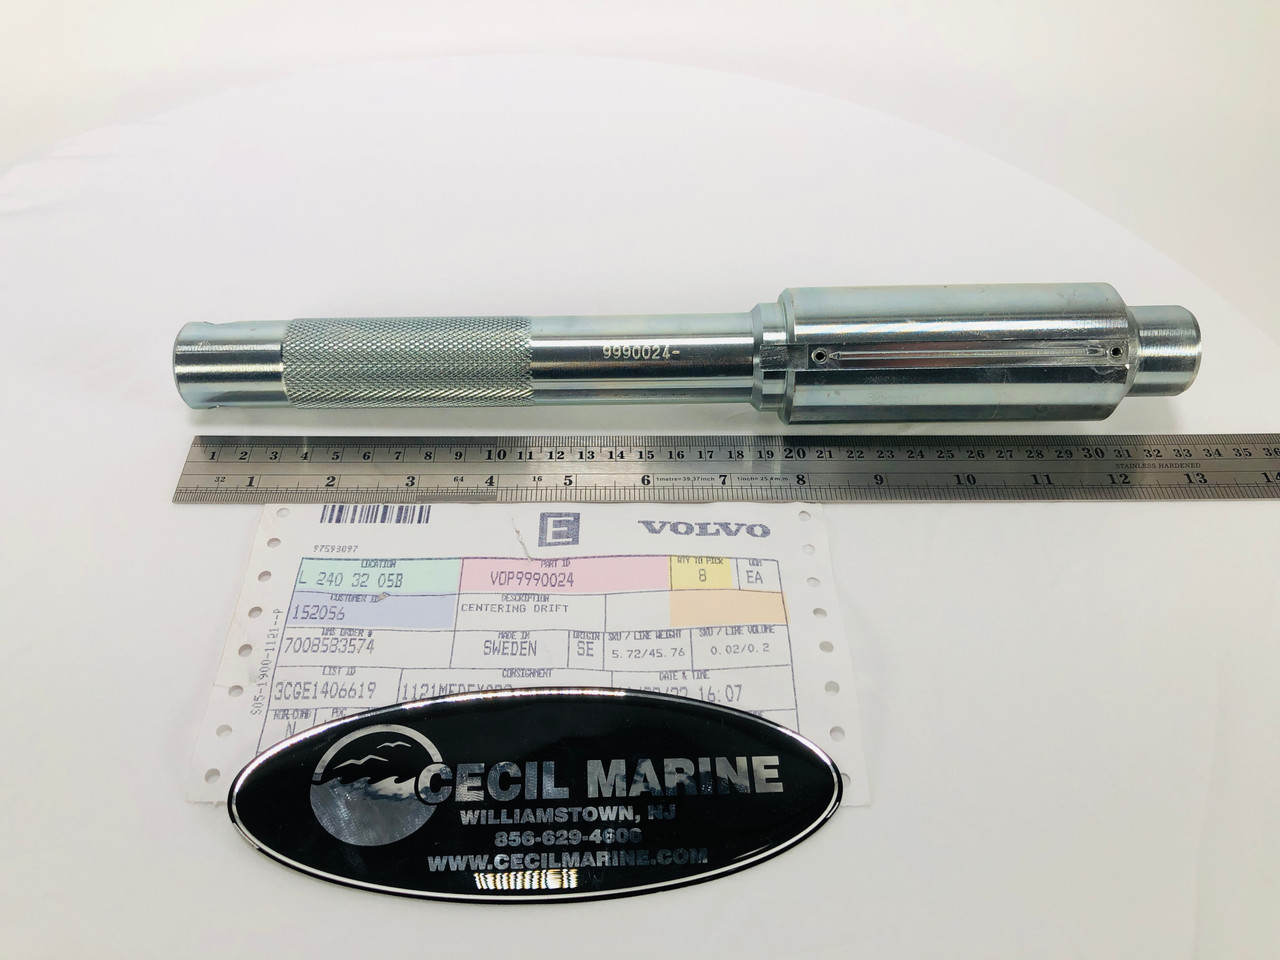 $379.99* GENUINE VOLVO no tax* CENTERING PRESS TOOL 9990024 *In Stock & Ready To Ship!